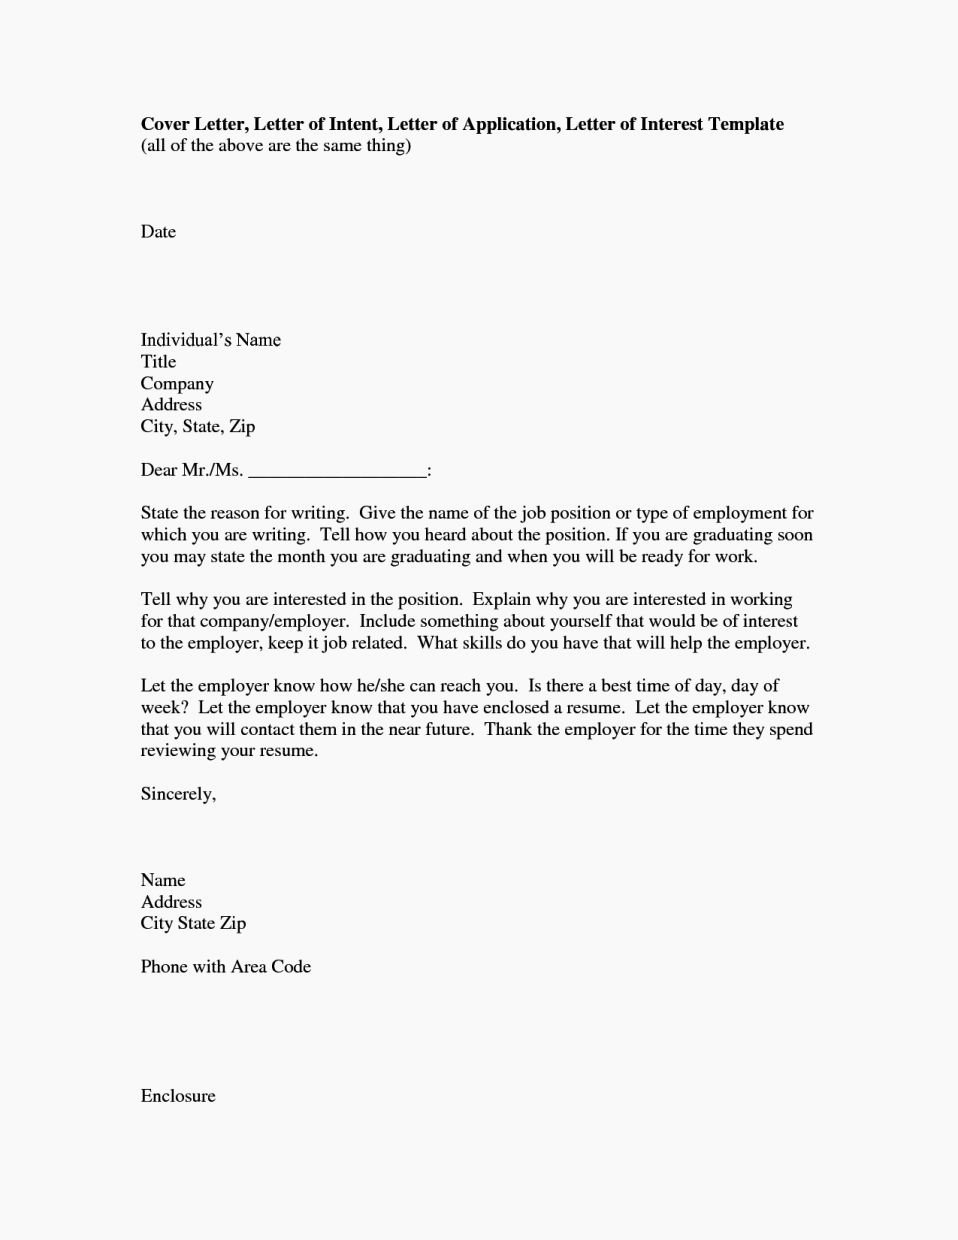 Free Letter Intent for A Job Template